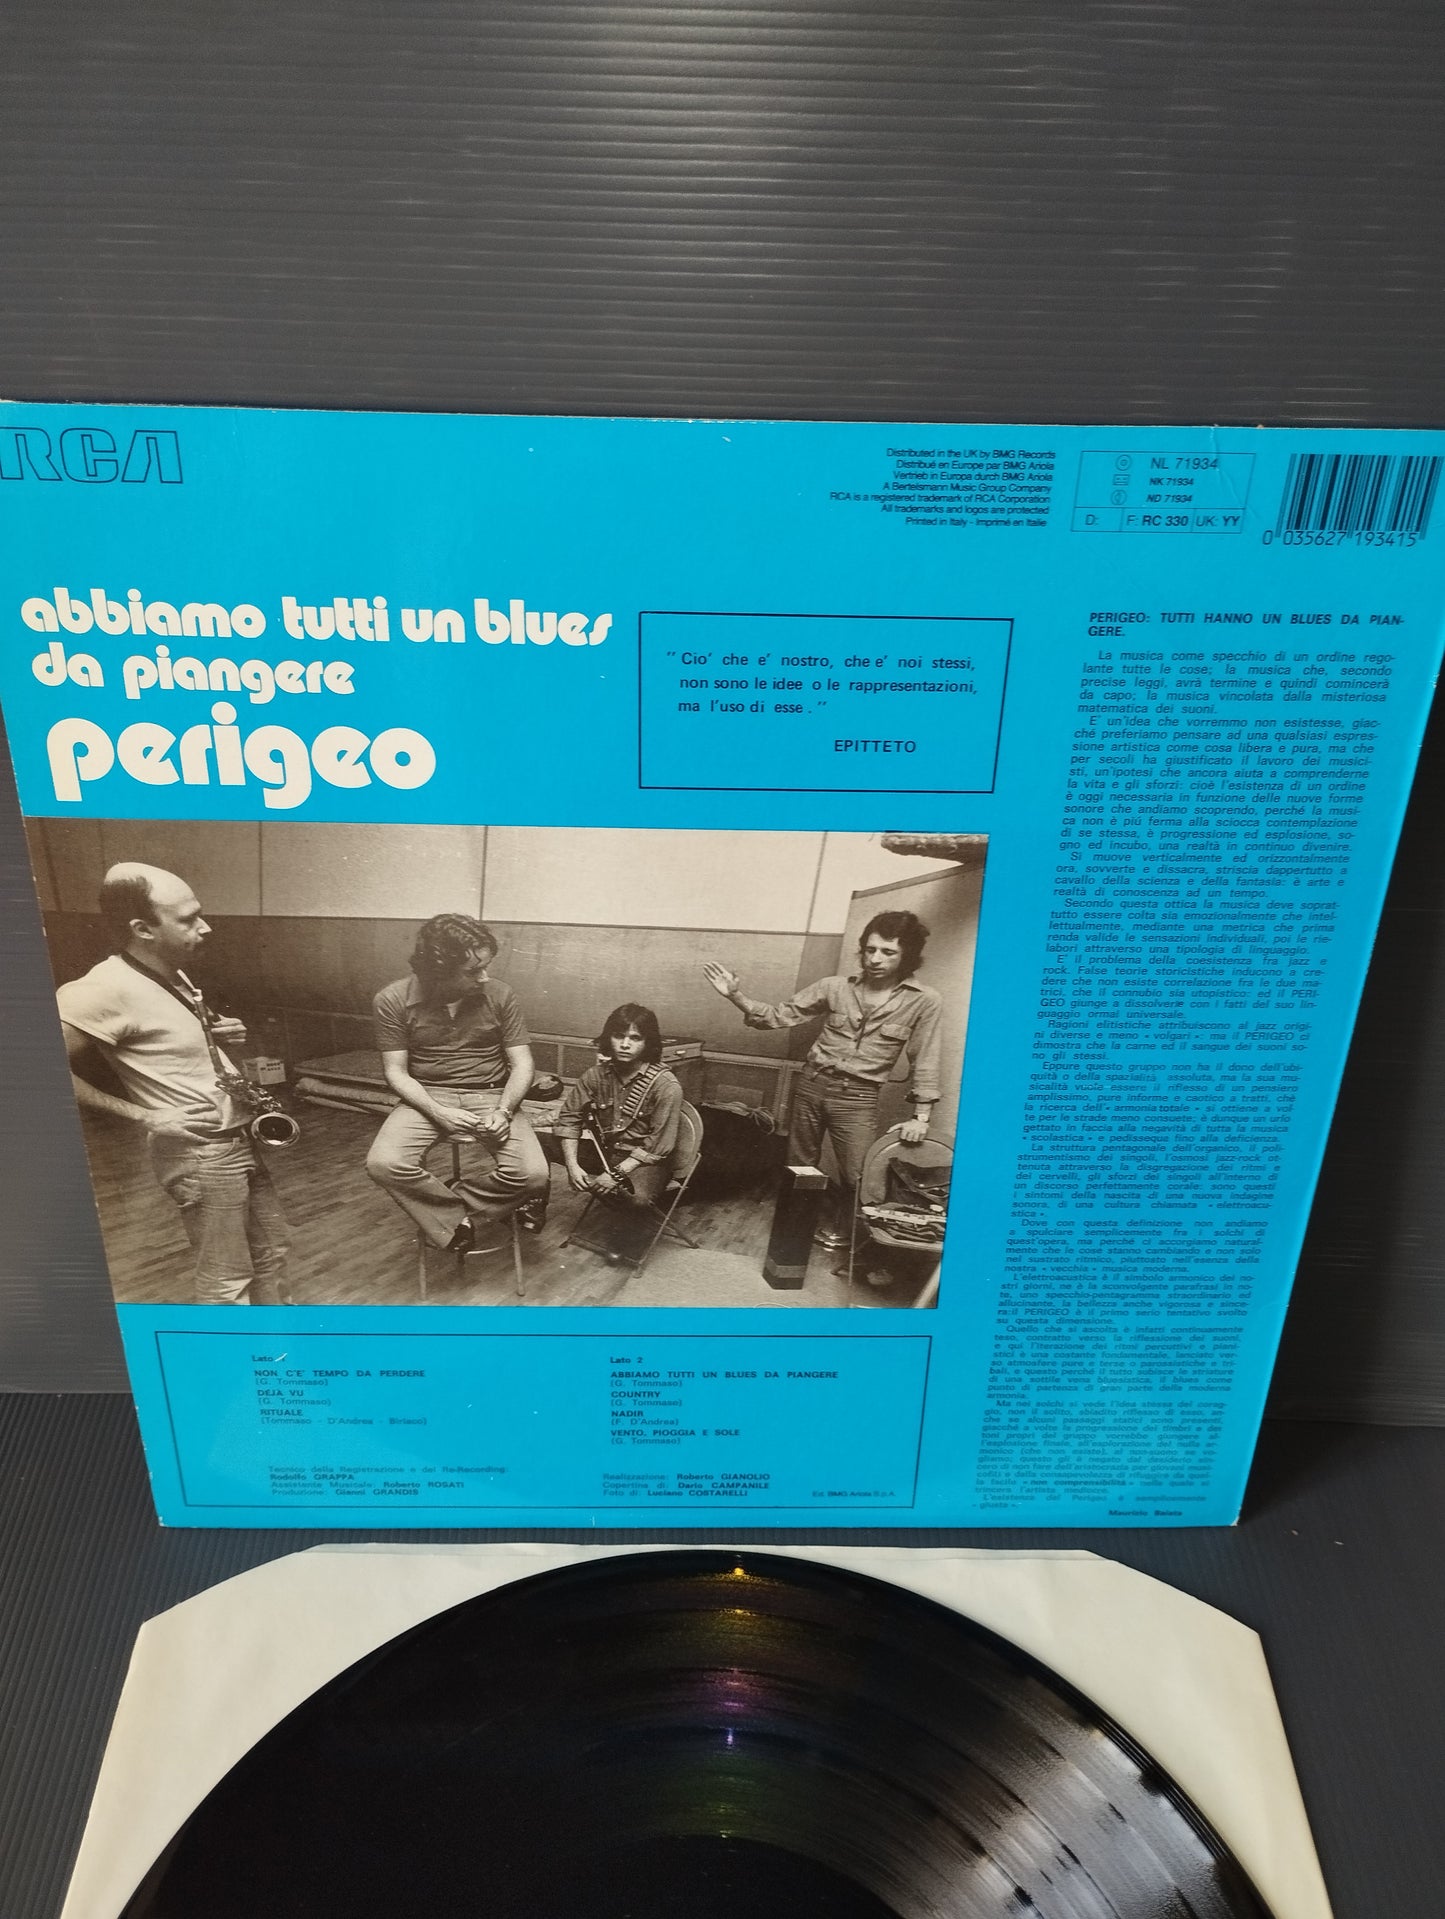 We All Have A Blues To Cry" Perigeo LP 33 rpm